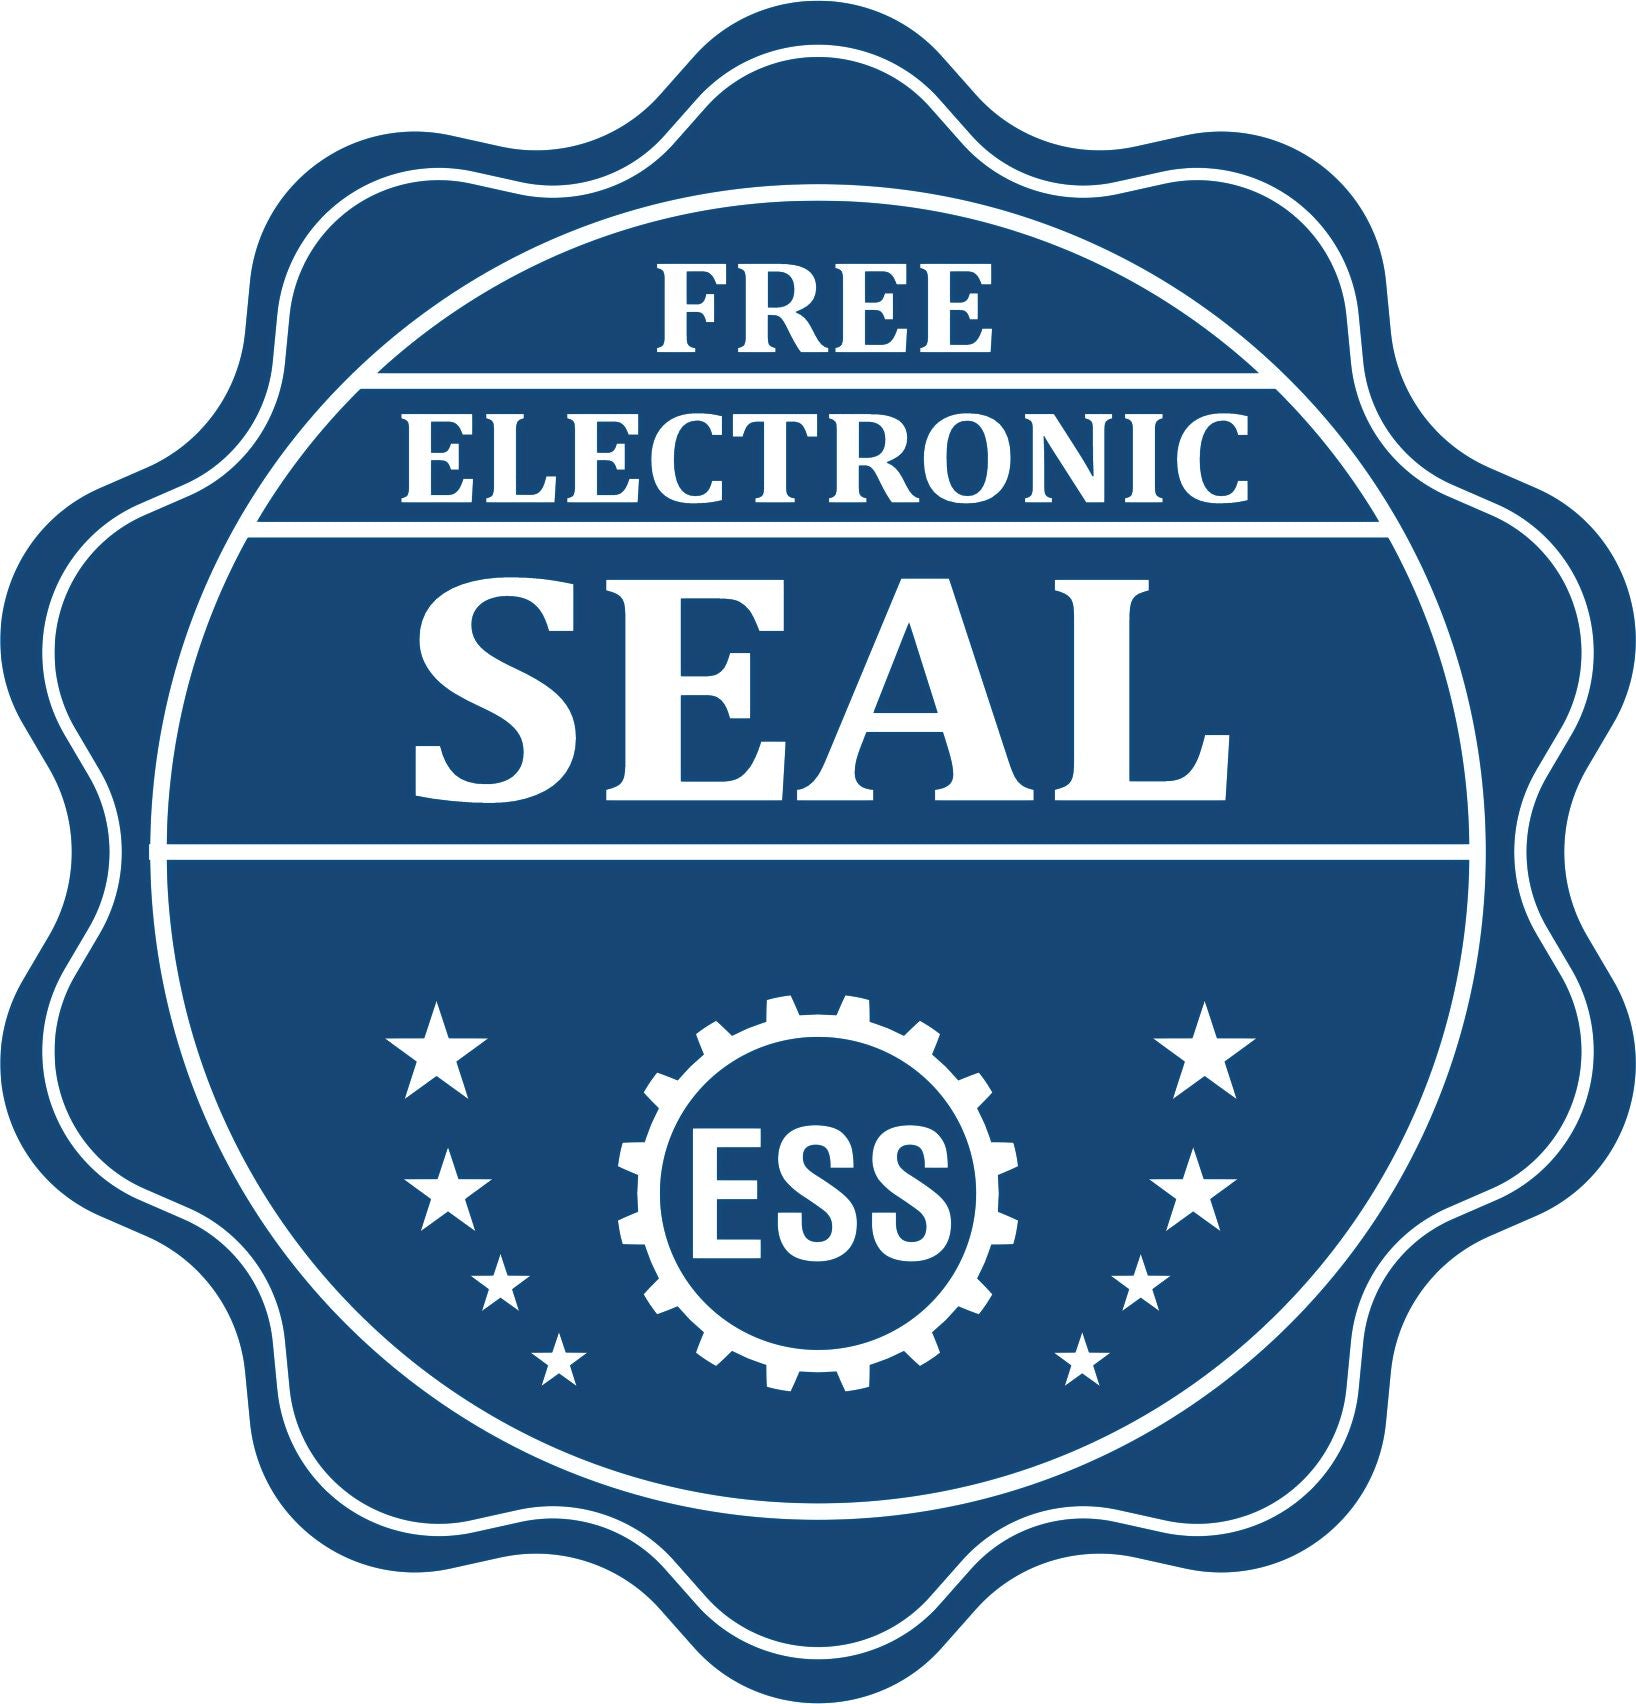 A badge showing a free electronic seal for the State of Delaware Architectural Seal Embosser with stars and the ESS gear on the emblem.